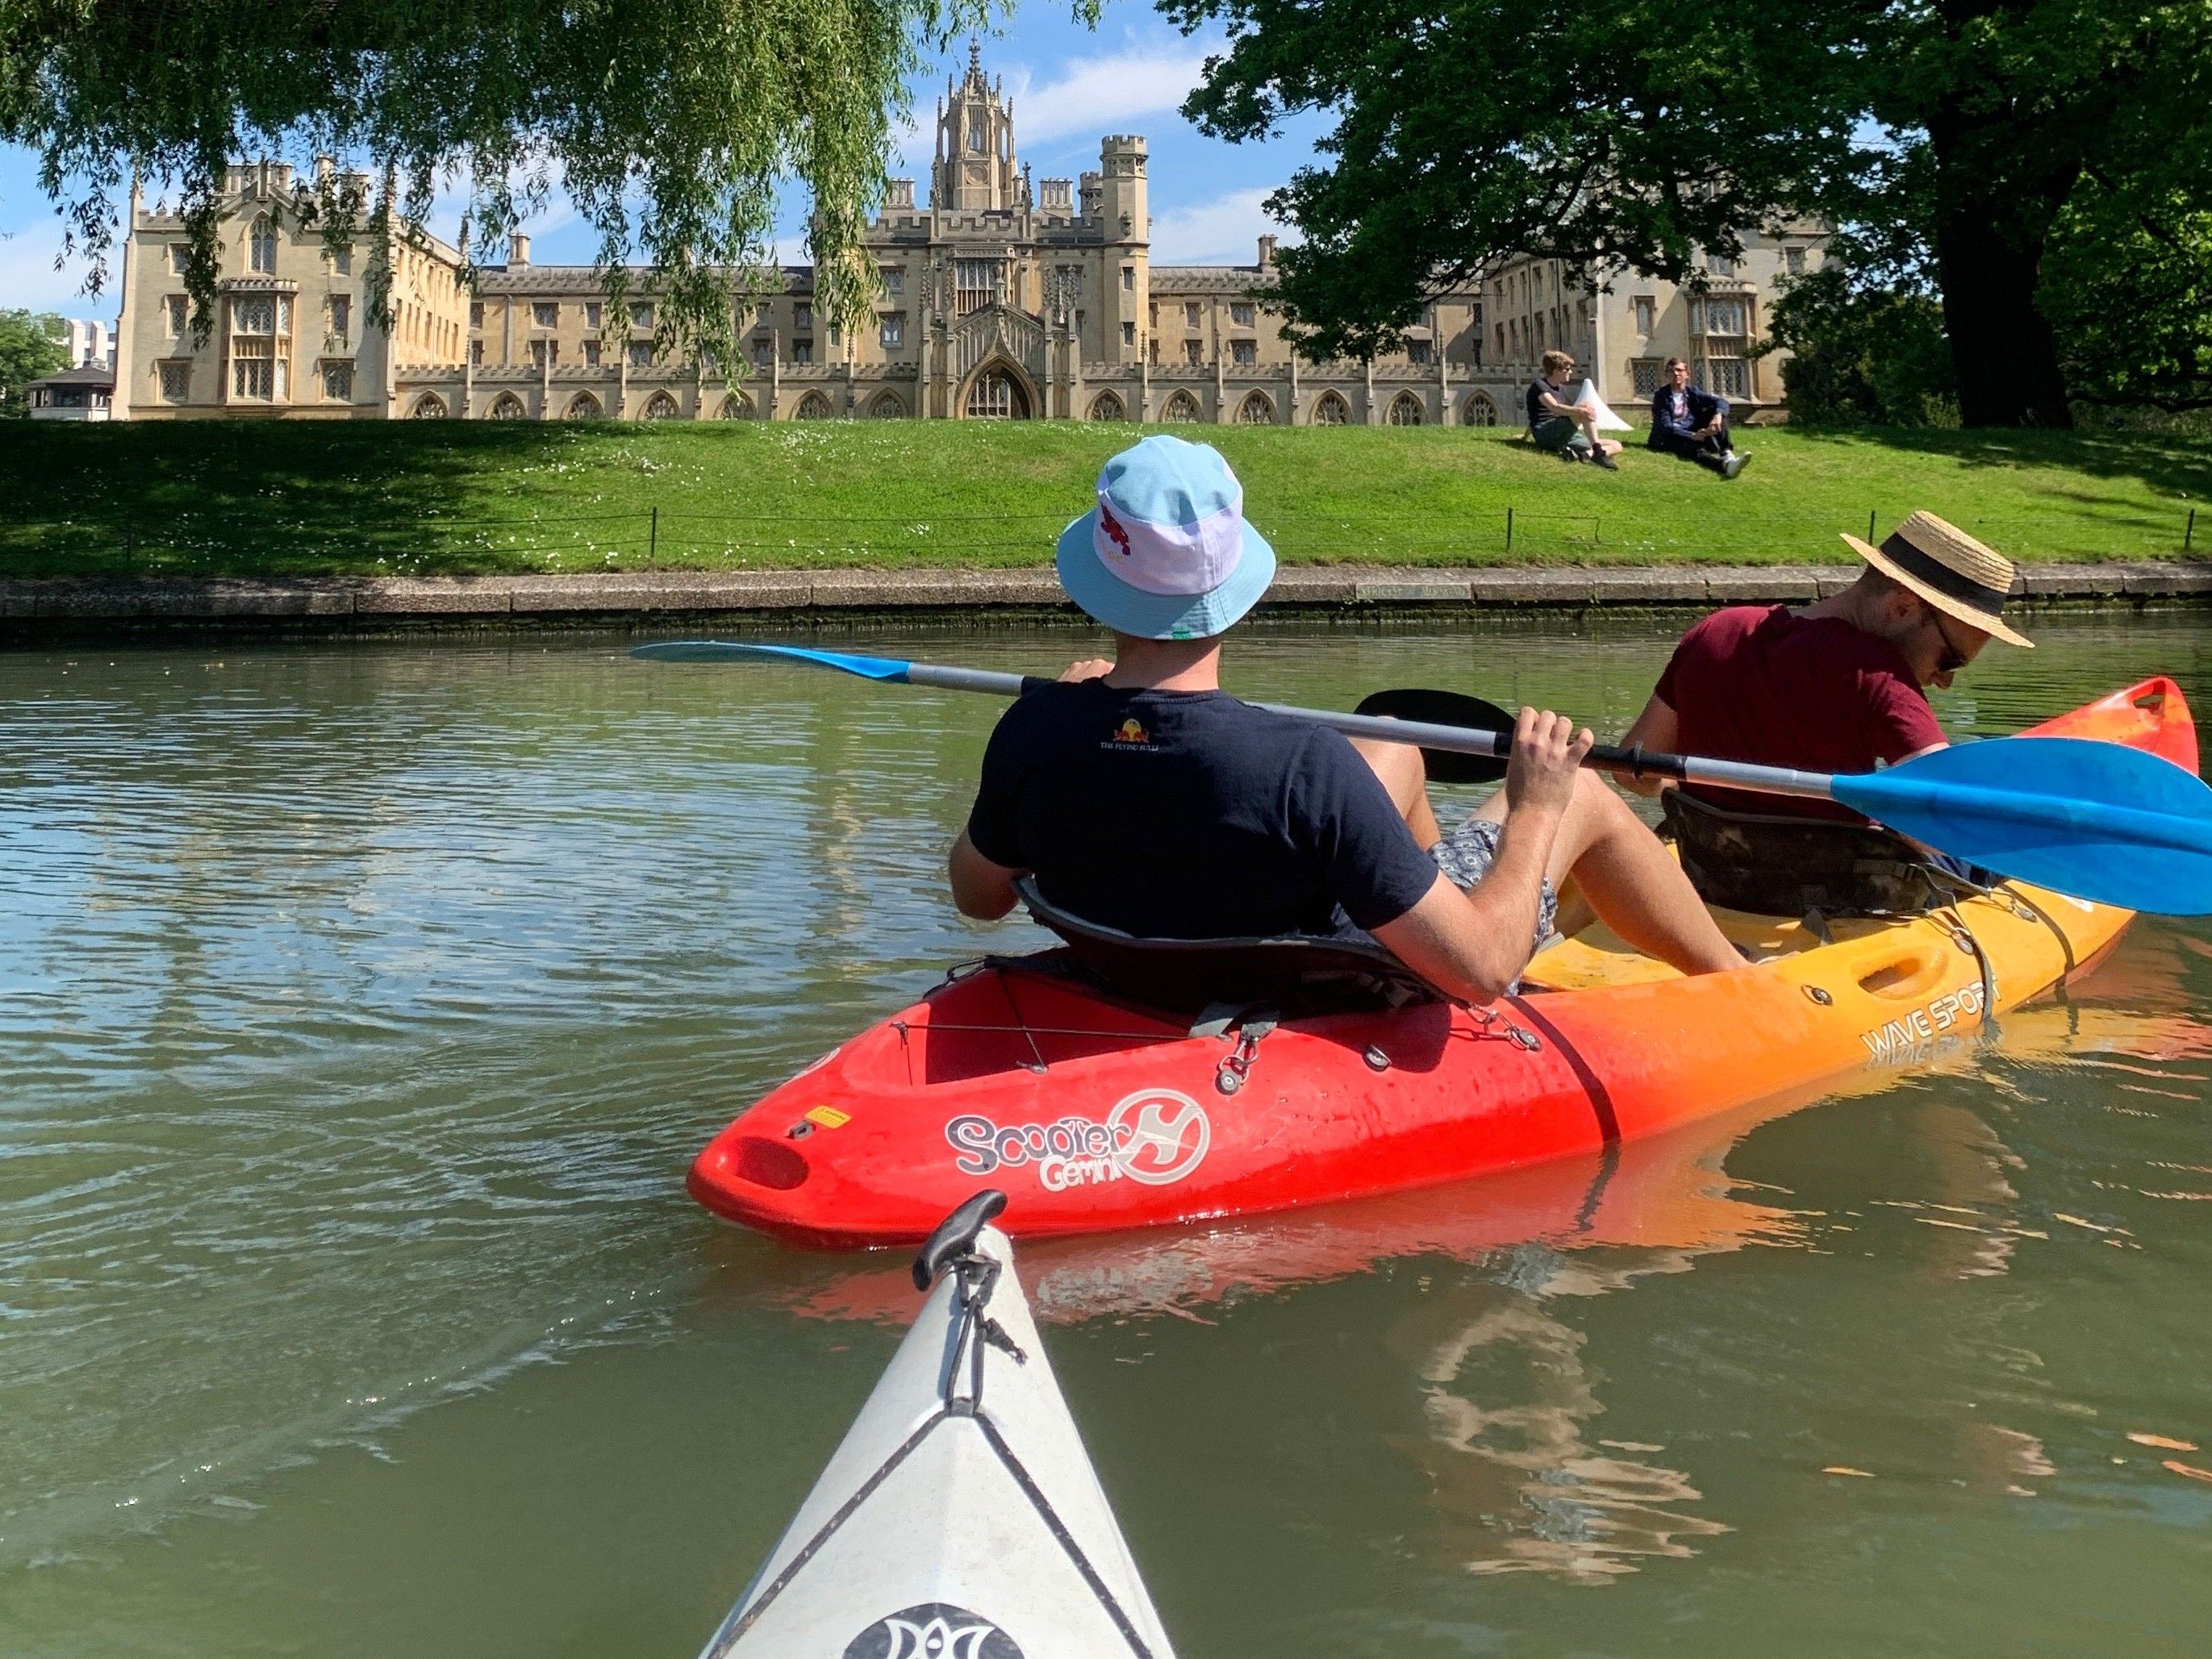 Cambridge university students kayaking on the river Cam overlooking a beautiful college building behind a patch of very green grass on the river bank. There are also two students sitting in the grass on the bank.